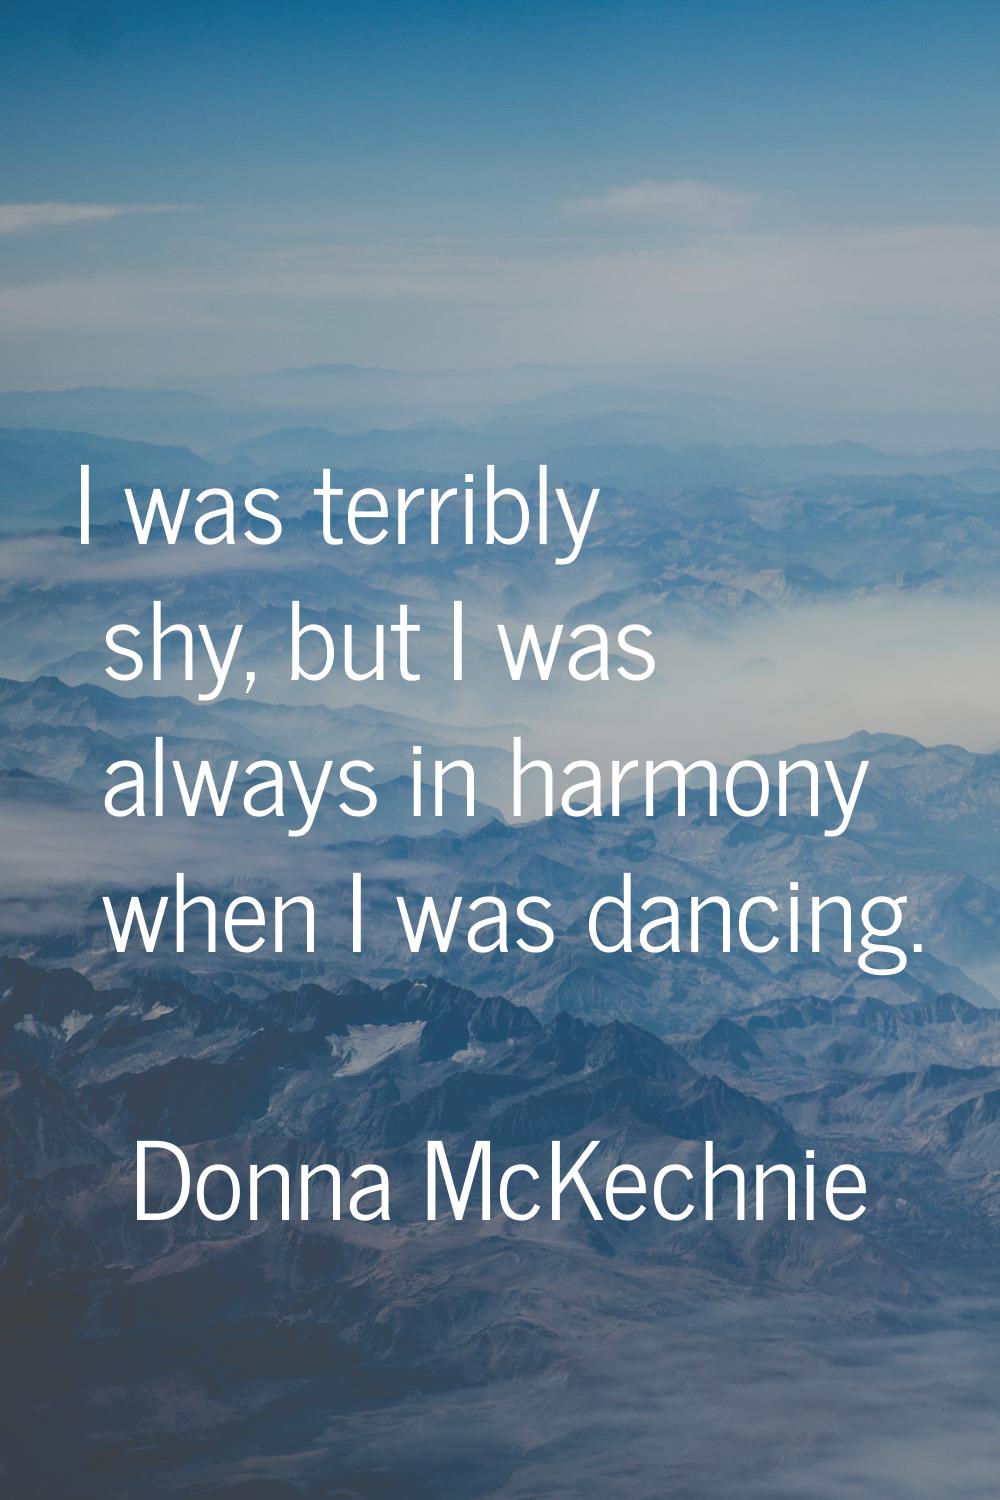 I was terribly shy, but I was always in harmony when I was dancing.